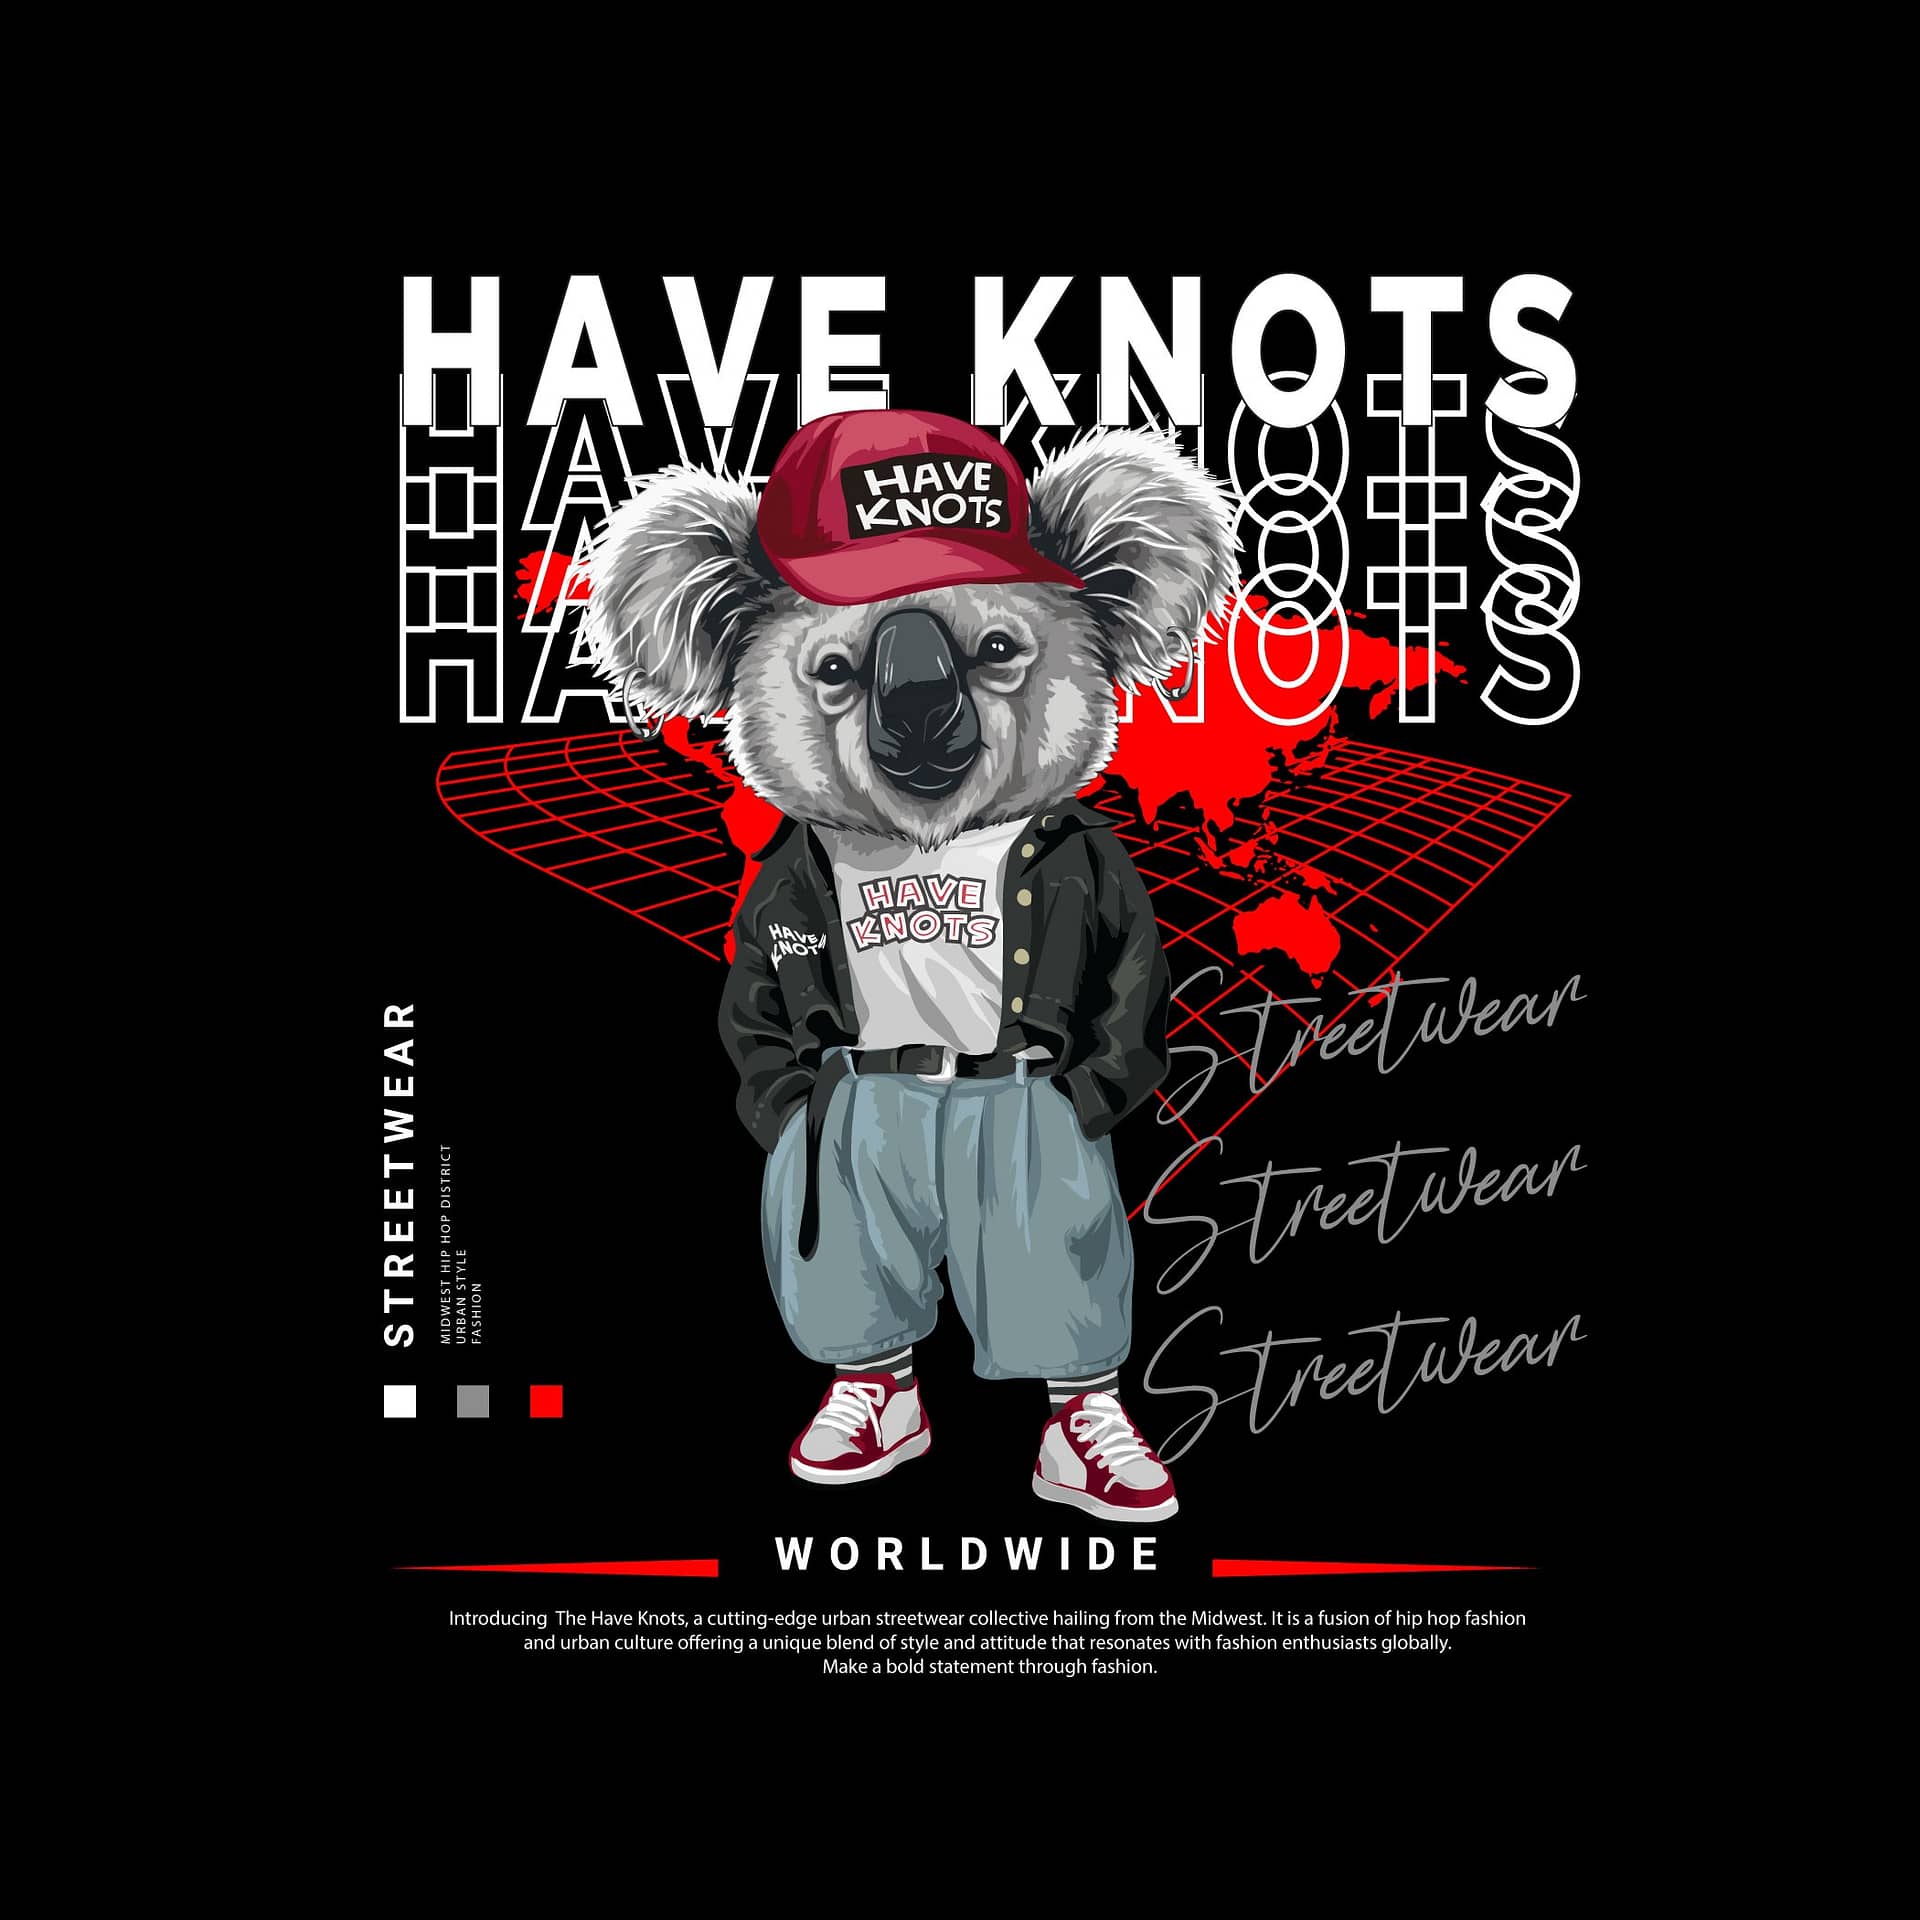 The Have Knots Urban Streetwear Brand Officially Launches